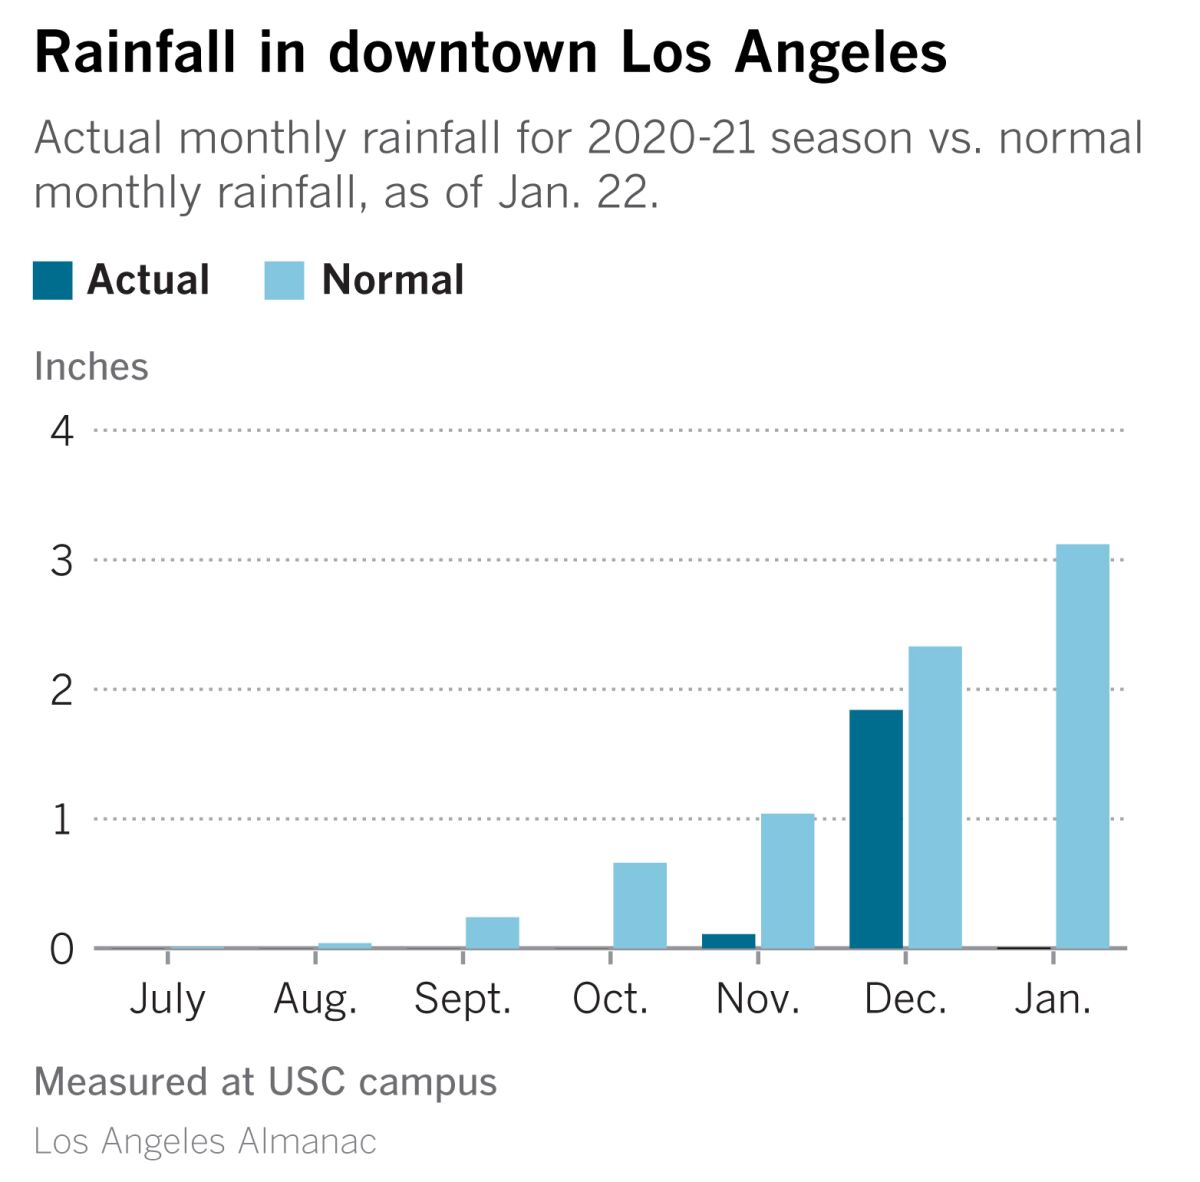 One decent storm in December punctuated an otherwise dry fall and early winter in downtown Los Angeles.